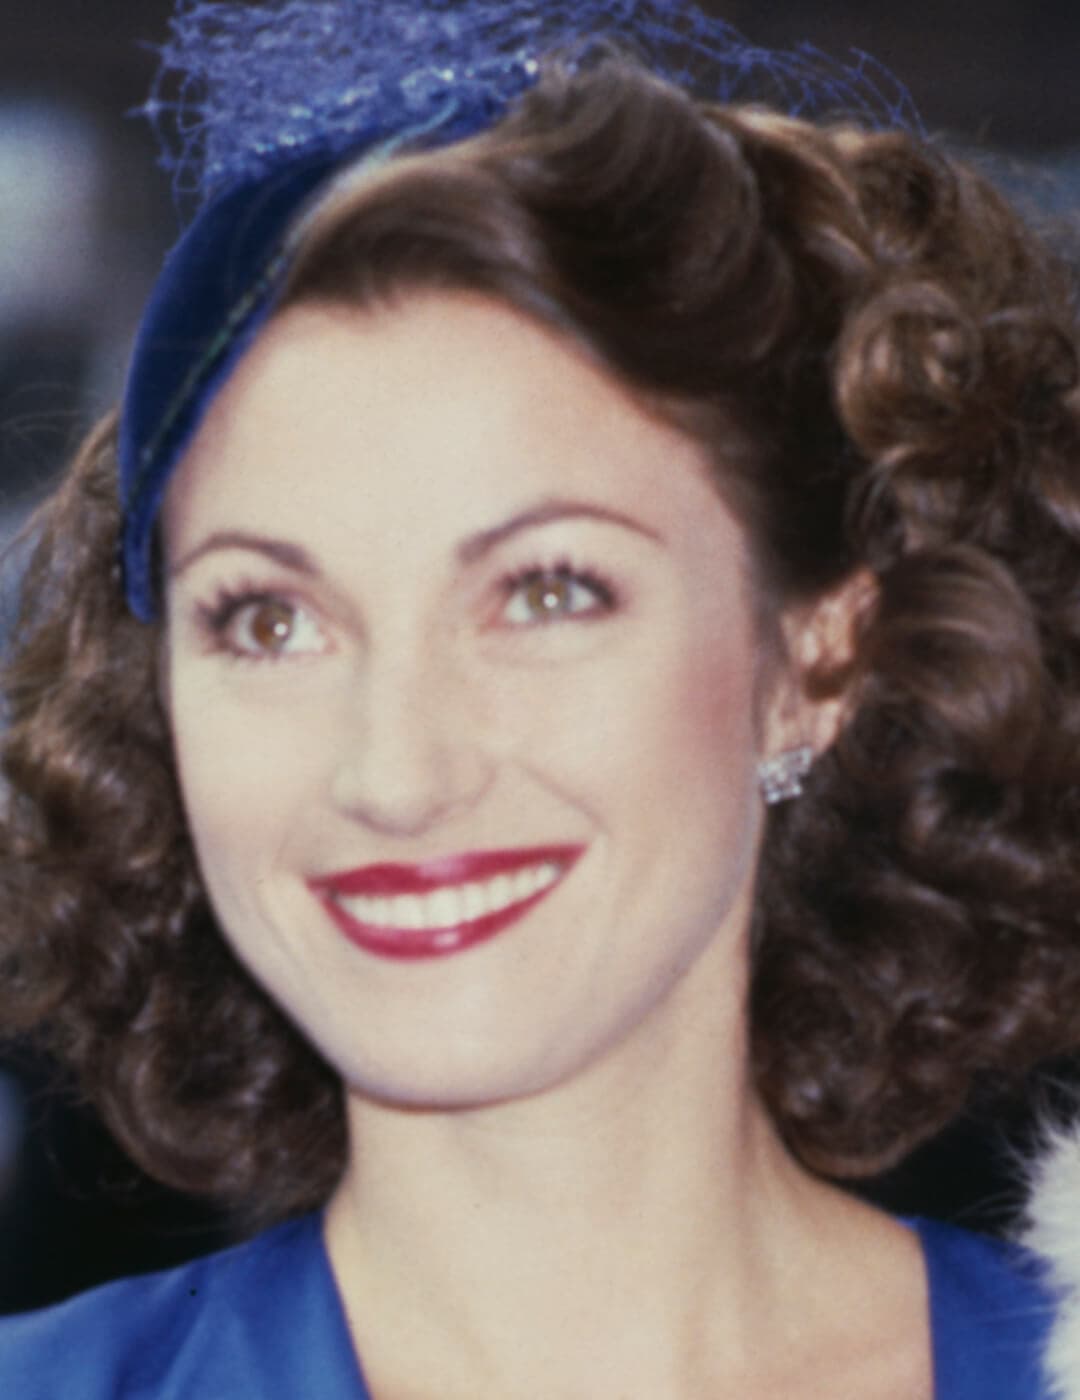 A photo of Jane Seymour wearing a blue outfit with plunging neckline and a blue fascinator, and a metallic fuchsia lip